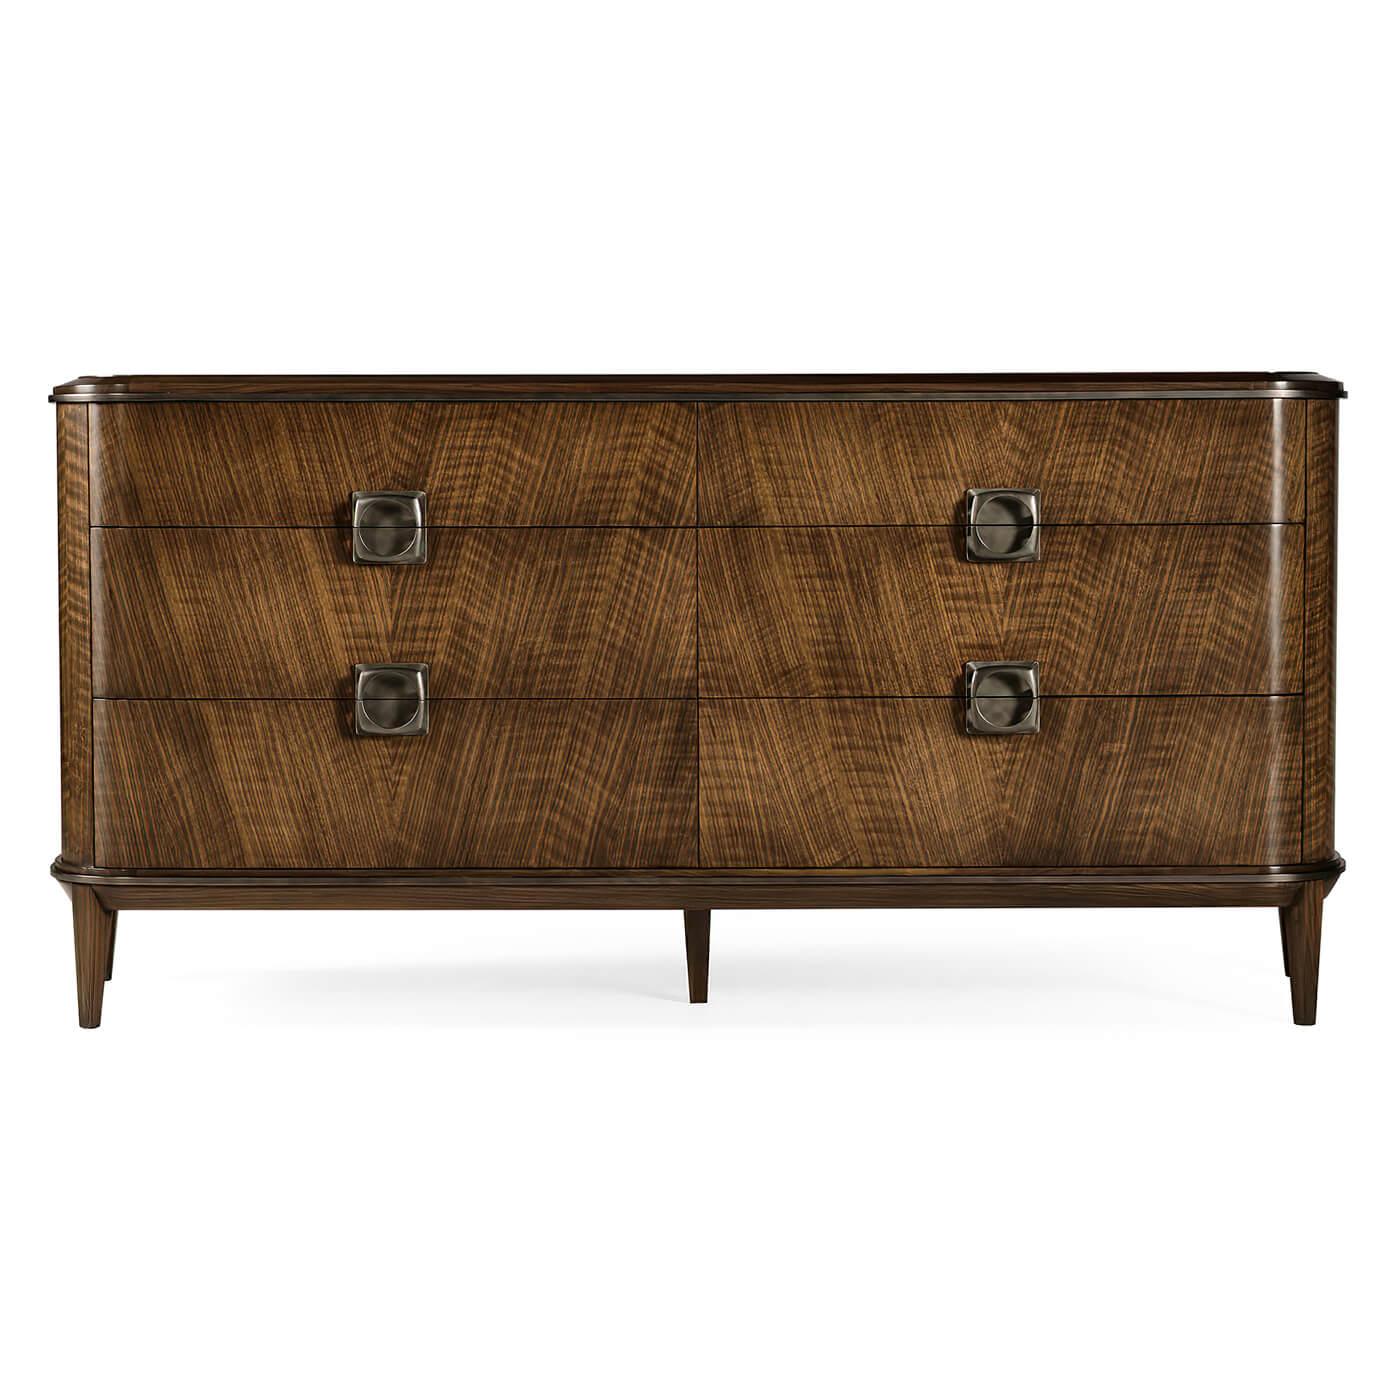 Mid-Century Modern style dresser, constructed of walnut with a transparent lacquer finish. Top features walnut veneer in a pattern reminiscent of straw work. The hardware is cast and acid dipped and hand-rubbed to achieve a rich, natural